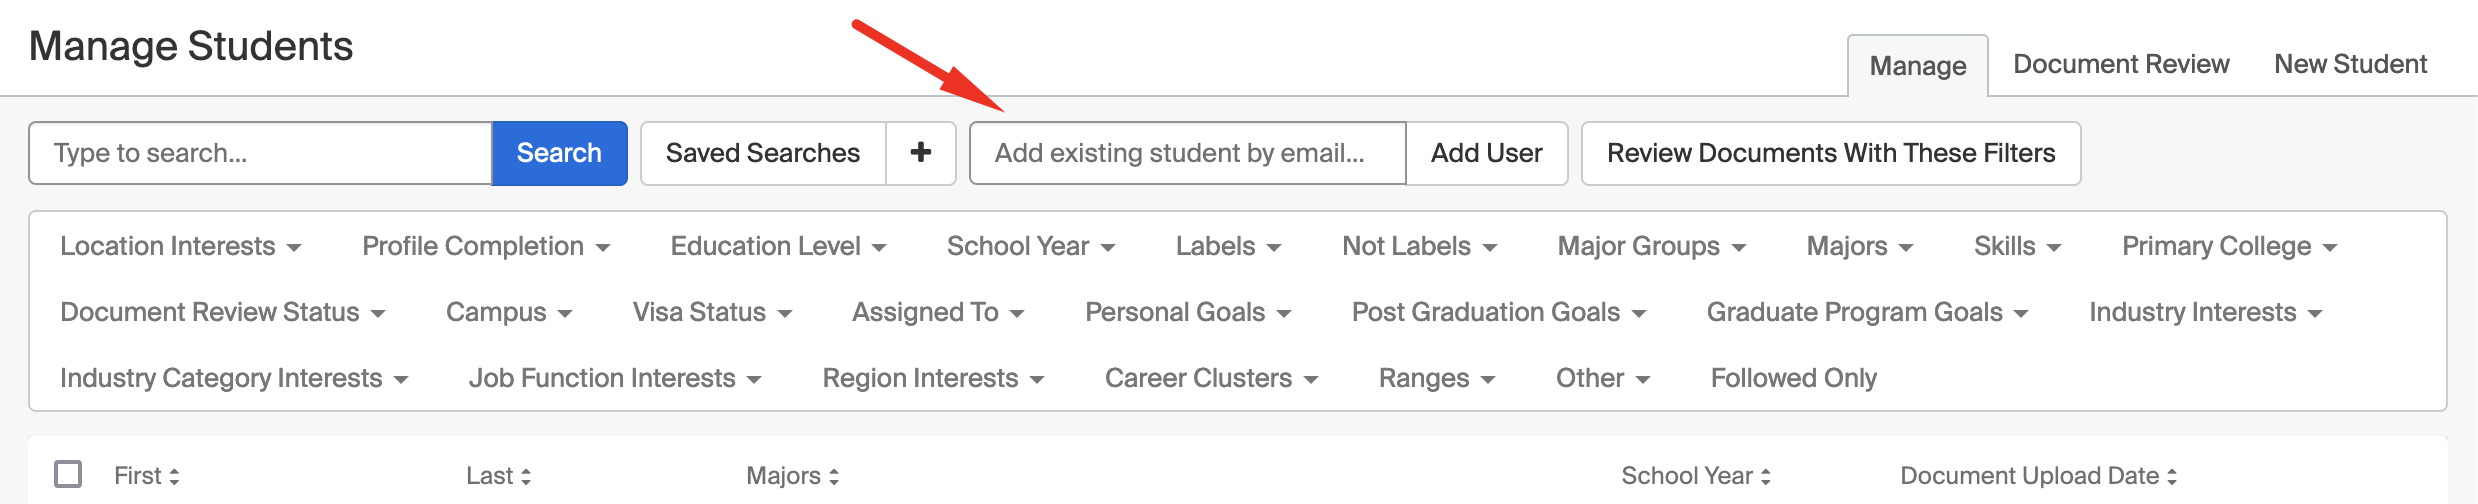 Add_existing_students_by_email_on_the_Students_Management_page.png